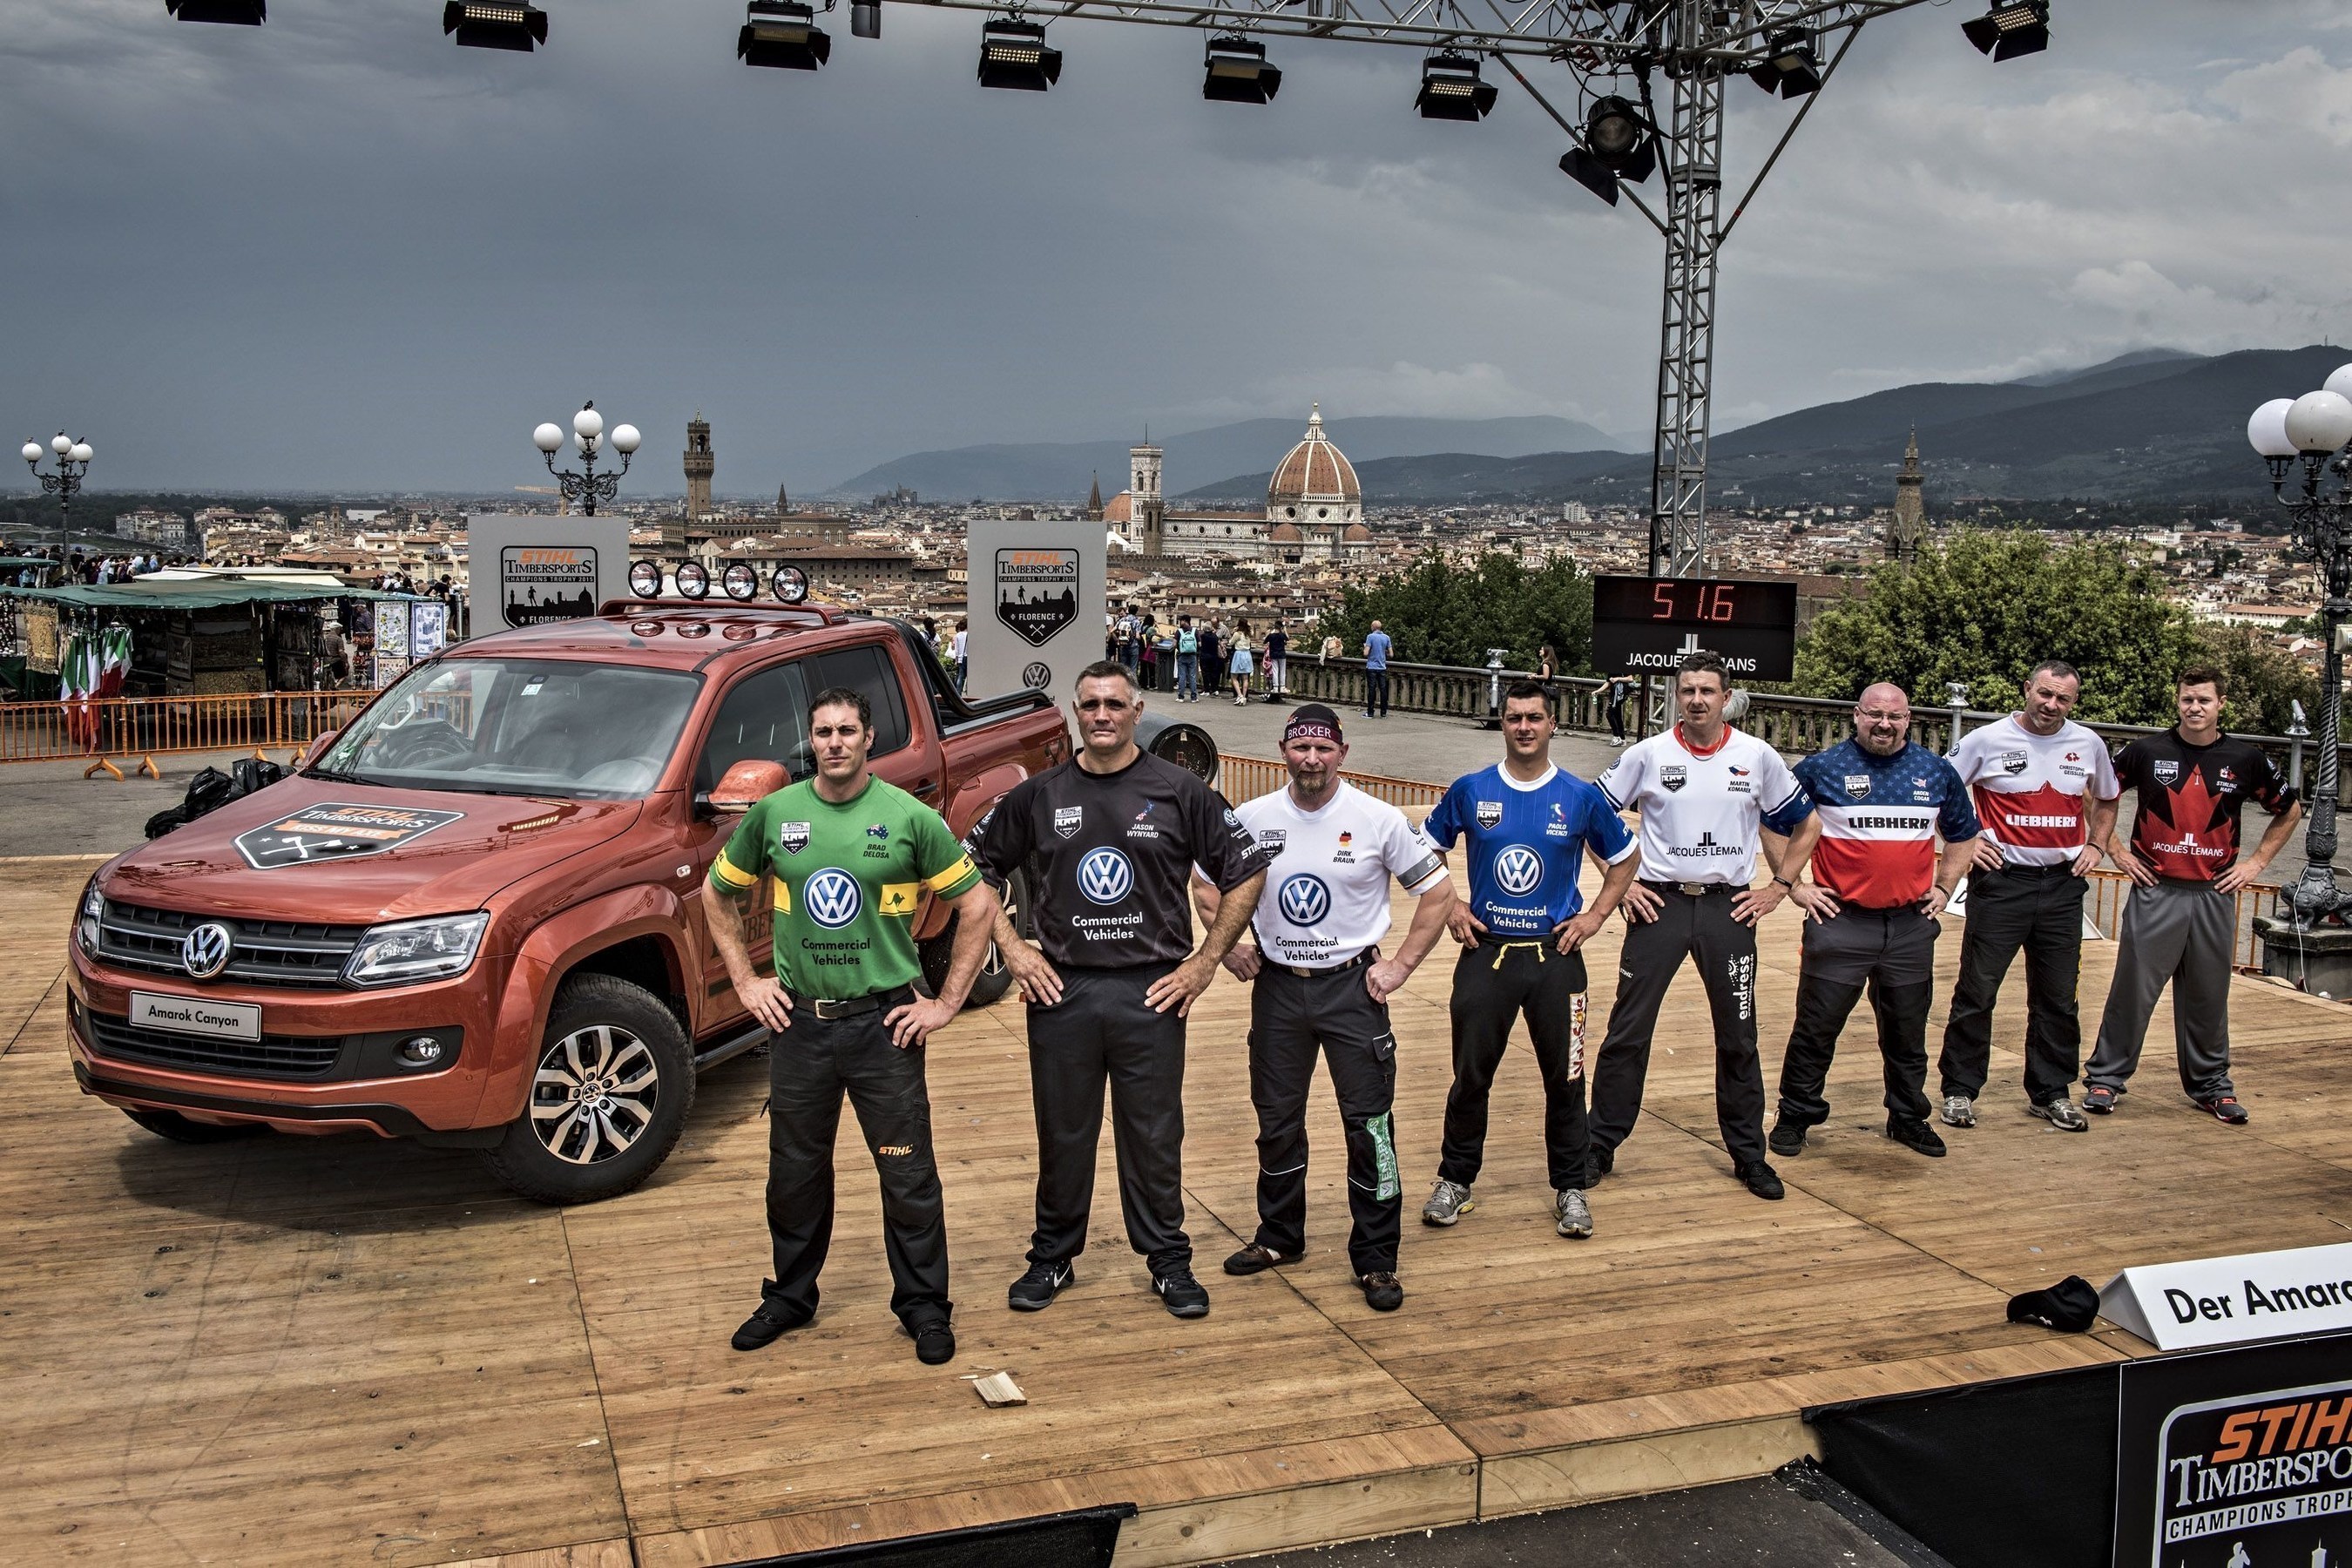 2015 Champions Trophy in Florence, Italy: the athletes on the stage with the Amarok pick-up. (PRNewsFoto/STIHL TIMBERSPORTS Series) (PRNewsFoto/STIHL TIMBERSPORTS Series)